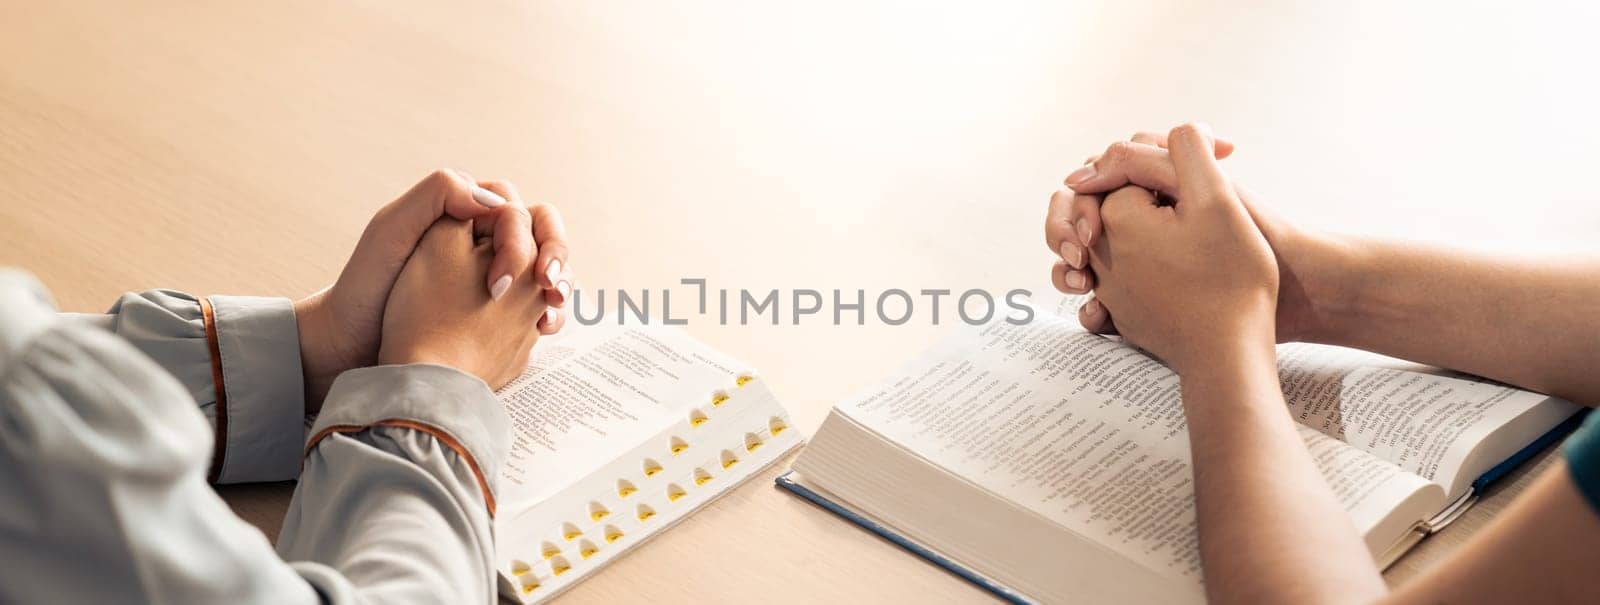 Two believer praying together on holy bible book faithfully with wooden cross placed at wooden church. Concept of hope, religion, faith, christianity and god blessing. Facing hand. Burgeoning.